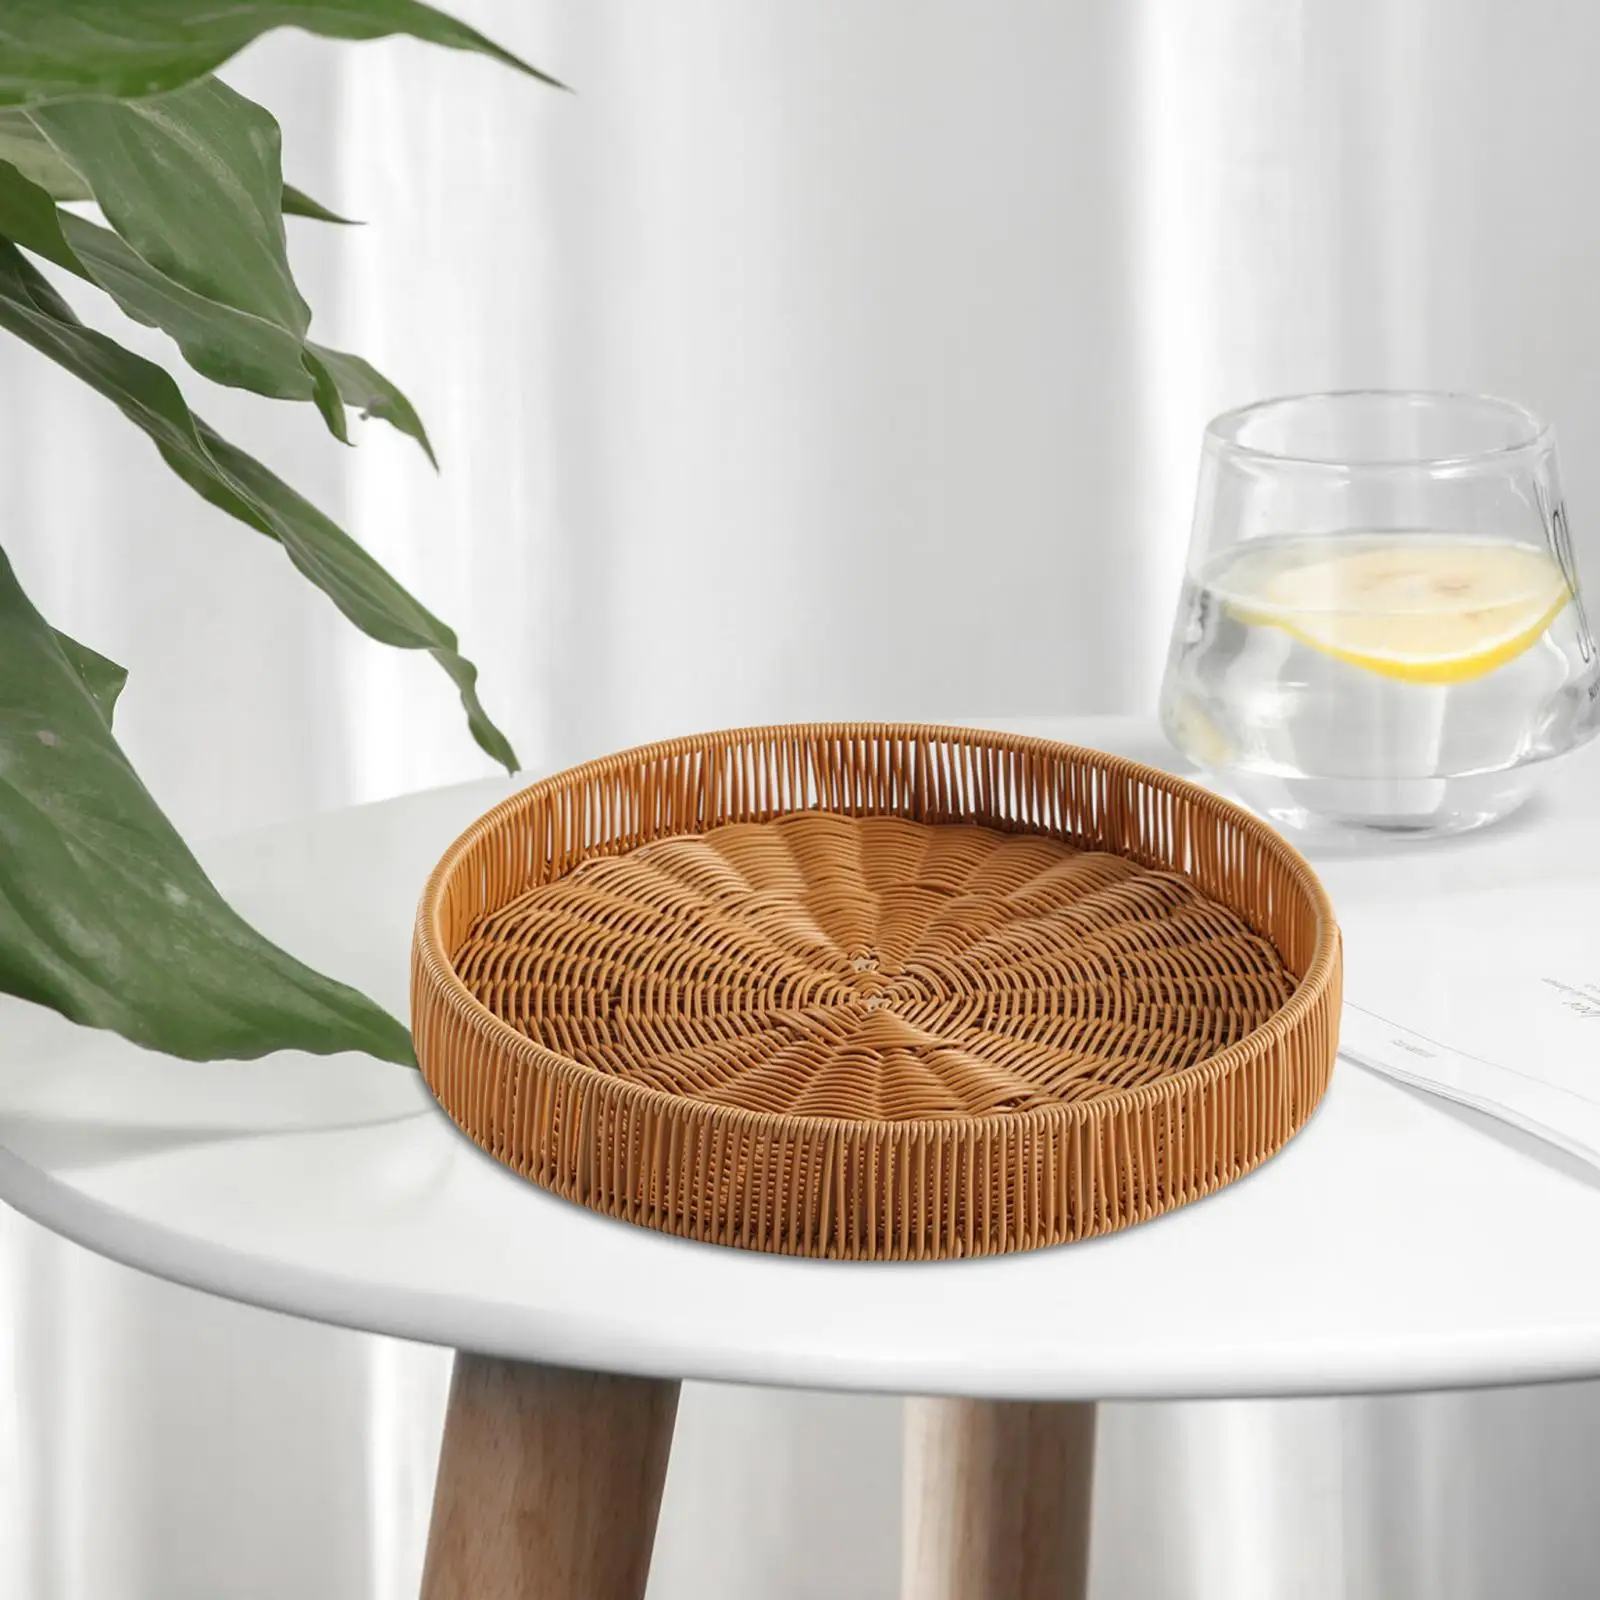 Round Imitation Rattan Tray Rustic Hand Woven Serving Tray Bread Basket Ottoman